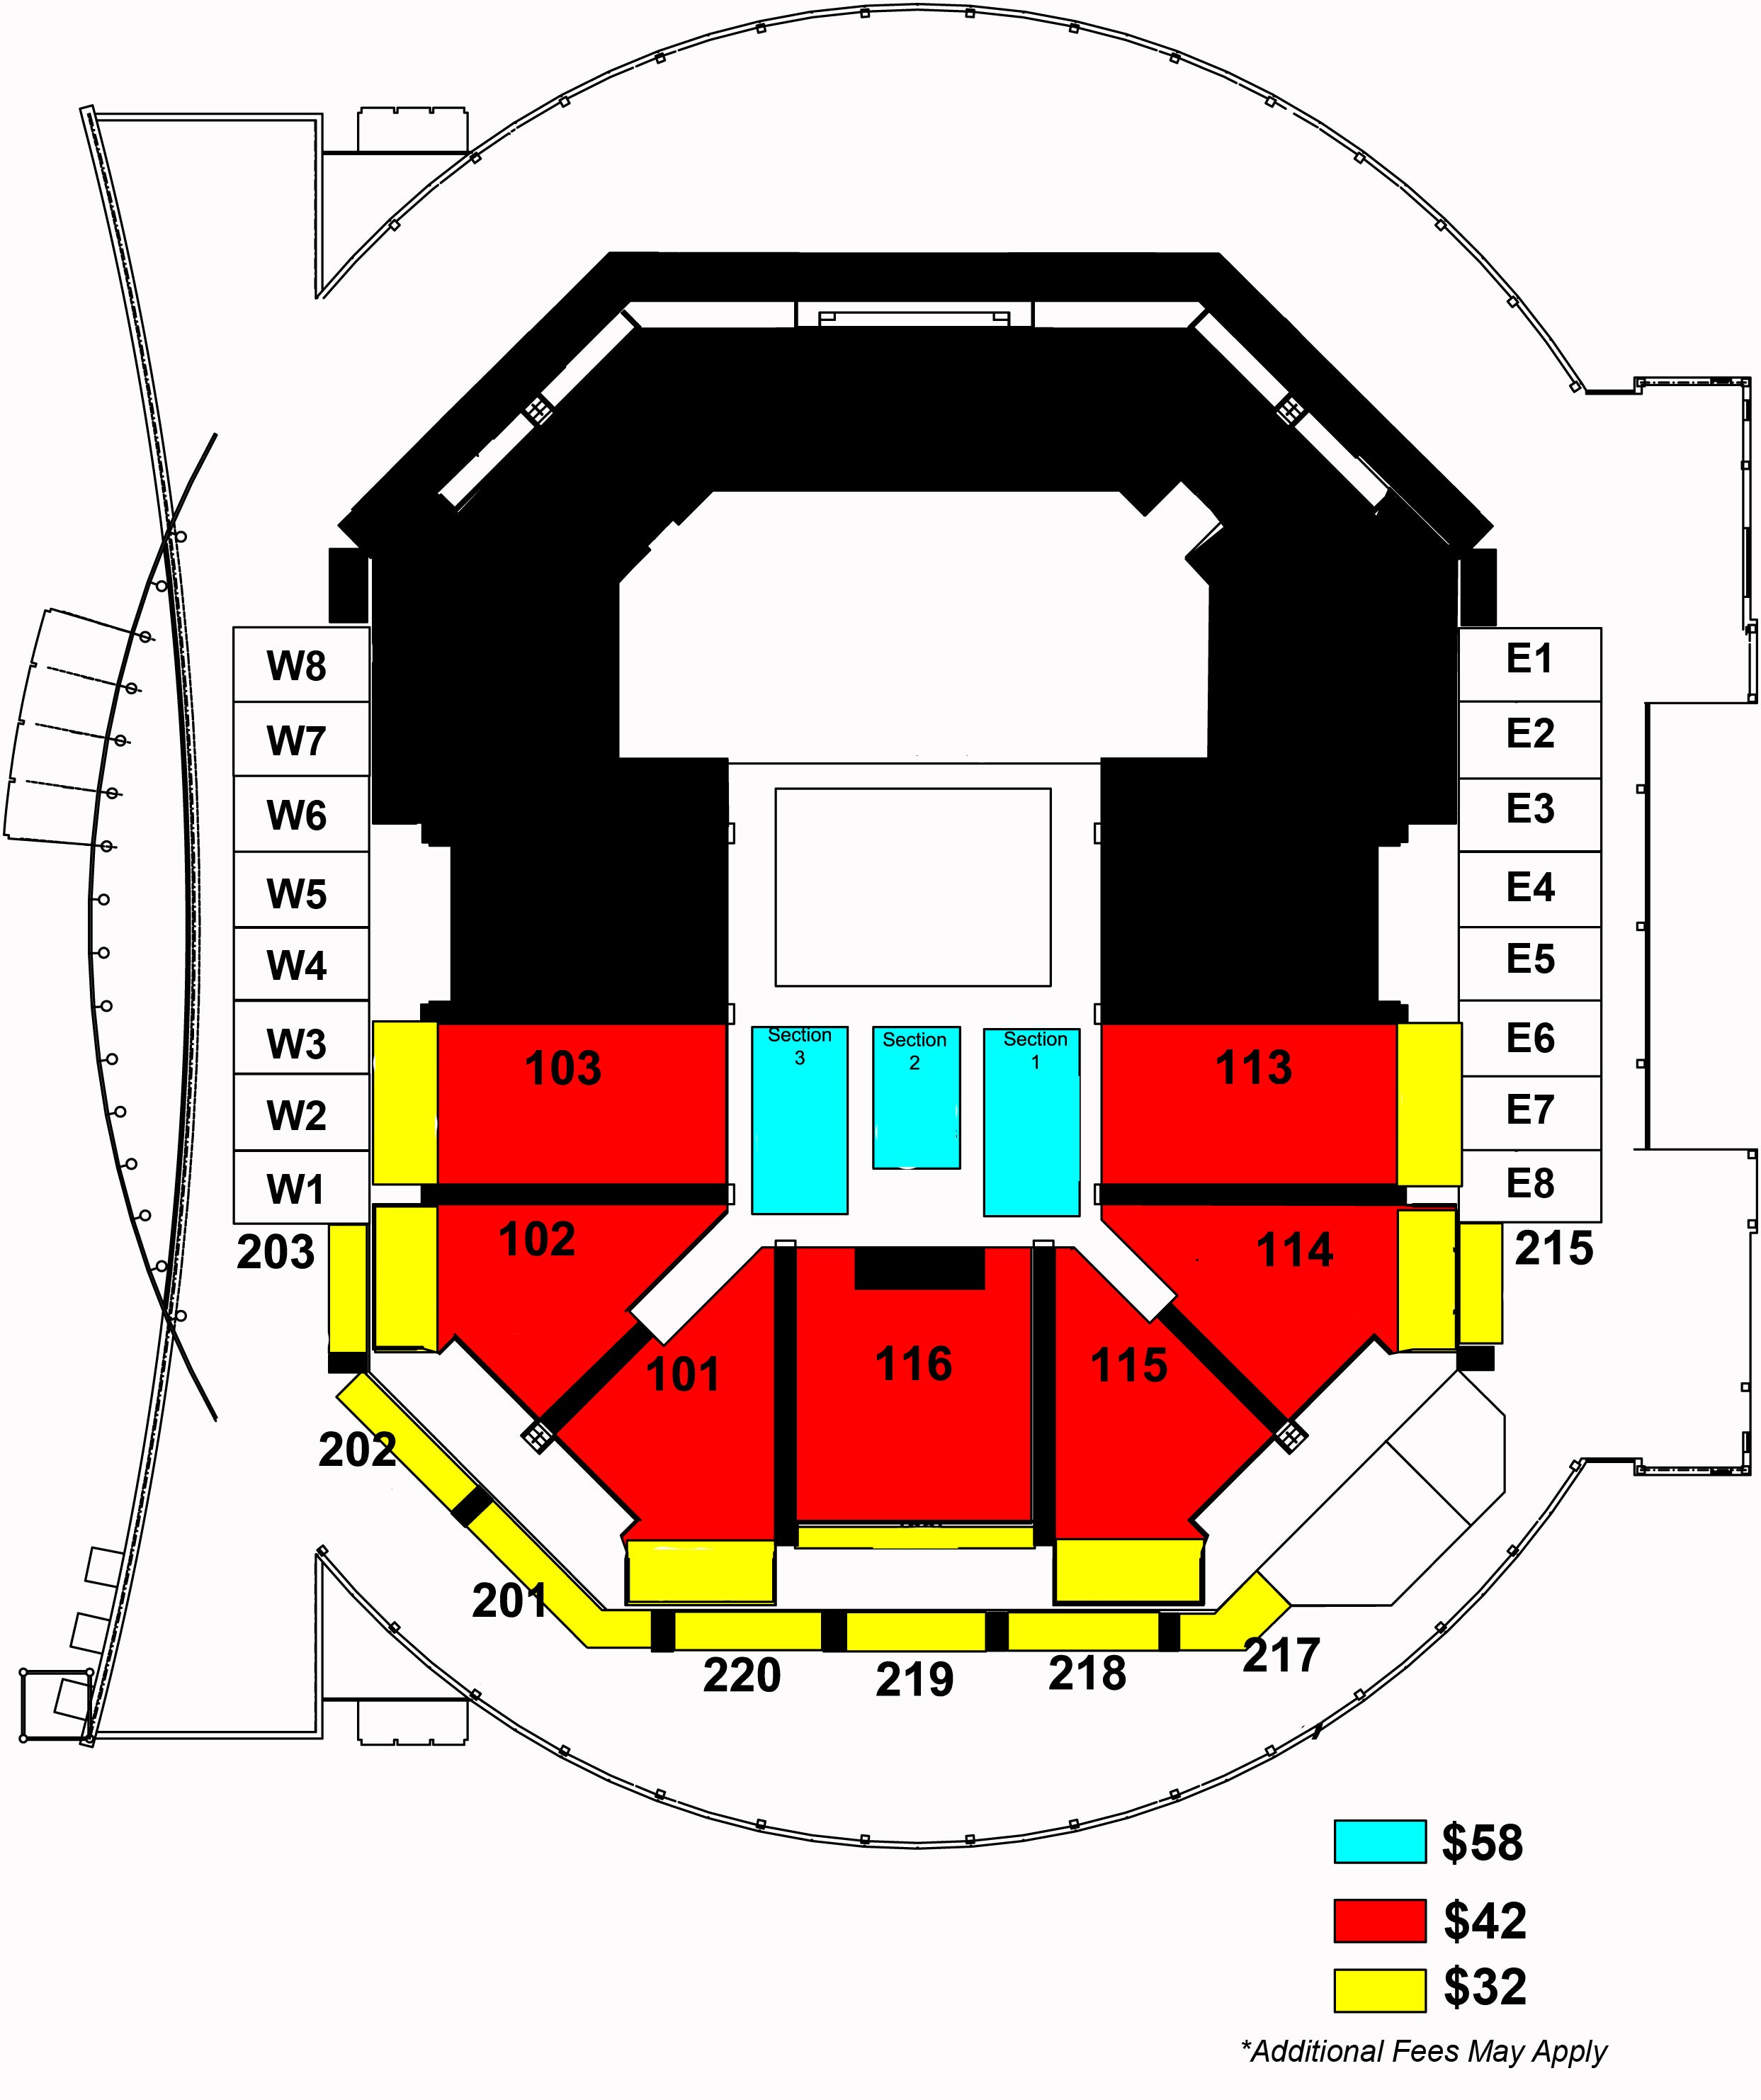 Ted Constant Convocation Center Seating Chart